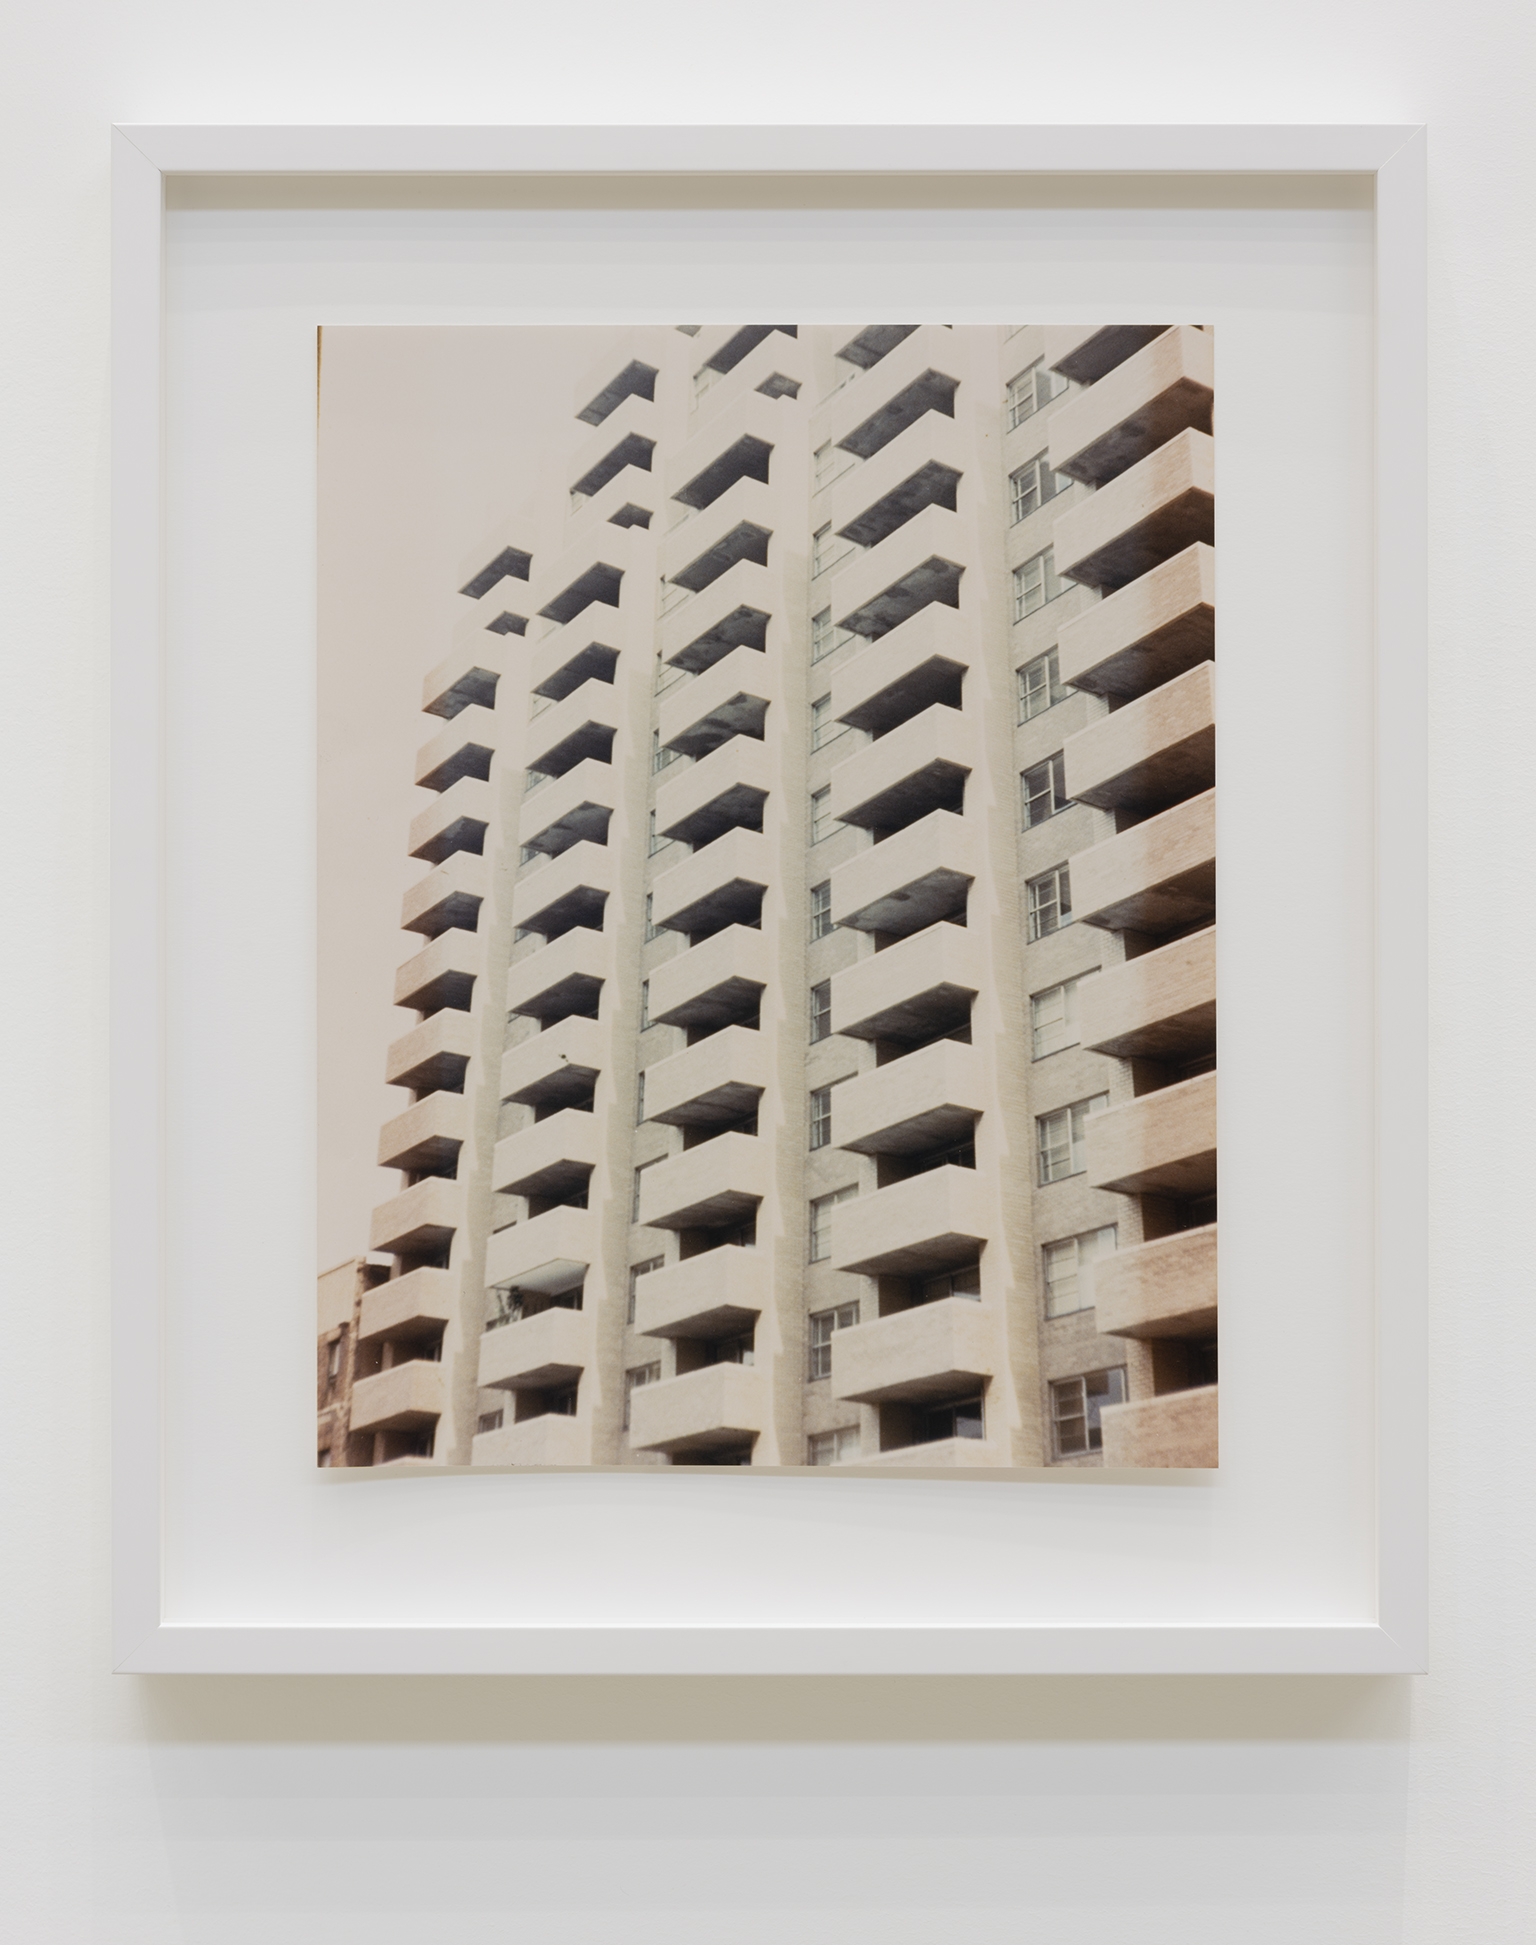 ​Dan Graham, Untitled (Homes for America), 1966, colour photograph, 19 x 16 in. (48 x 41 cm). by 